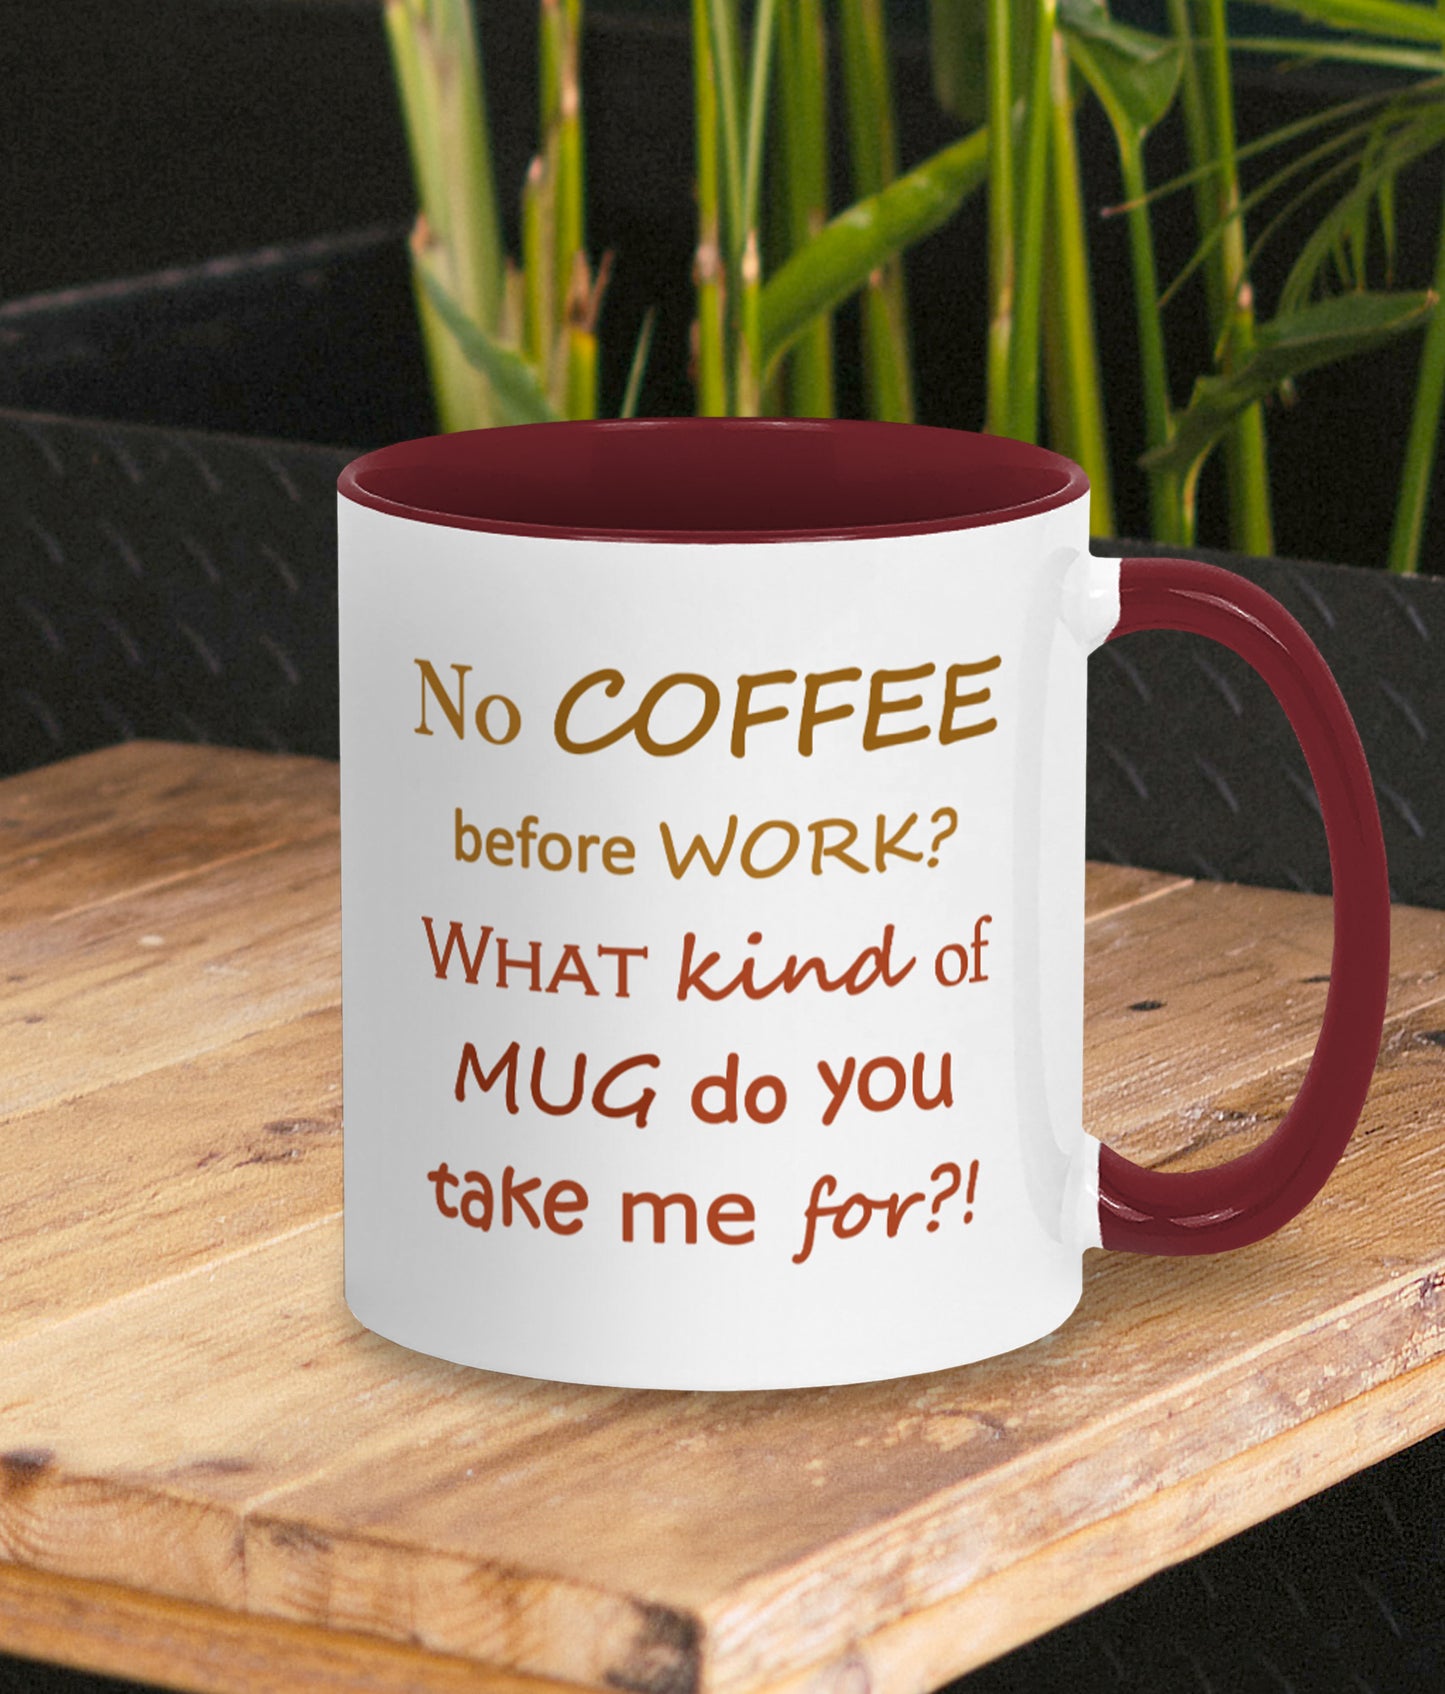 Funny mug for work. Gift for coffee lover and work bestie. White mug with dark red inner and handle. Two tone brown/red text on mug reads silly words No COFFEE before WORK? WHAT kind of MUG do you take me for?!